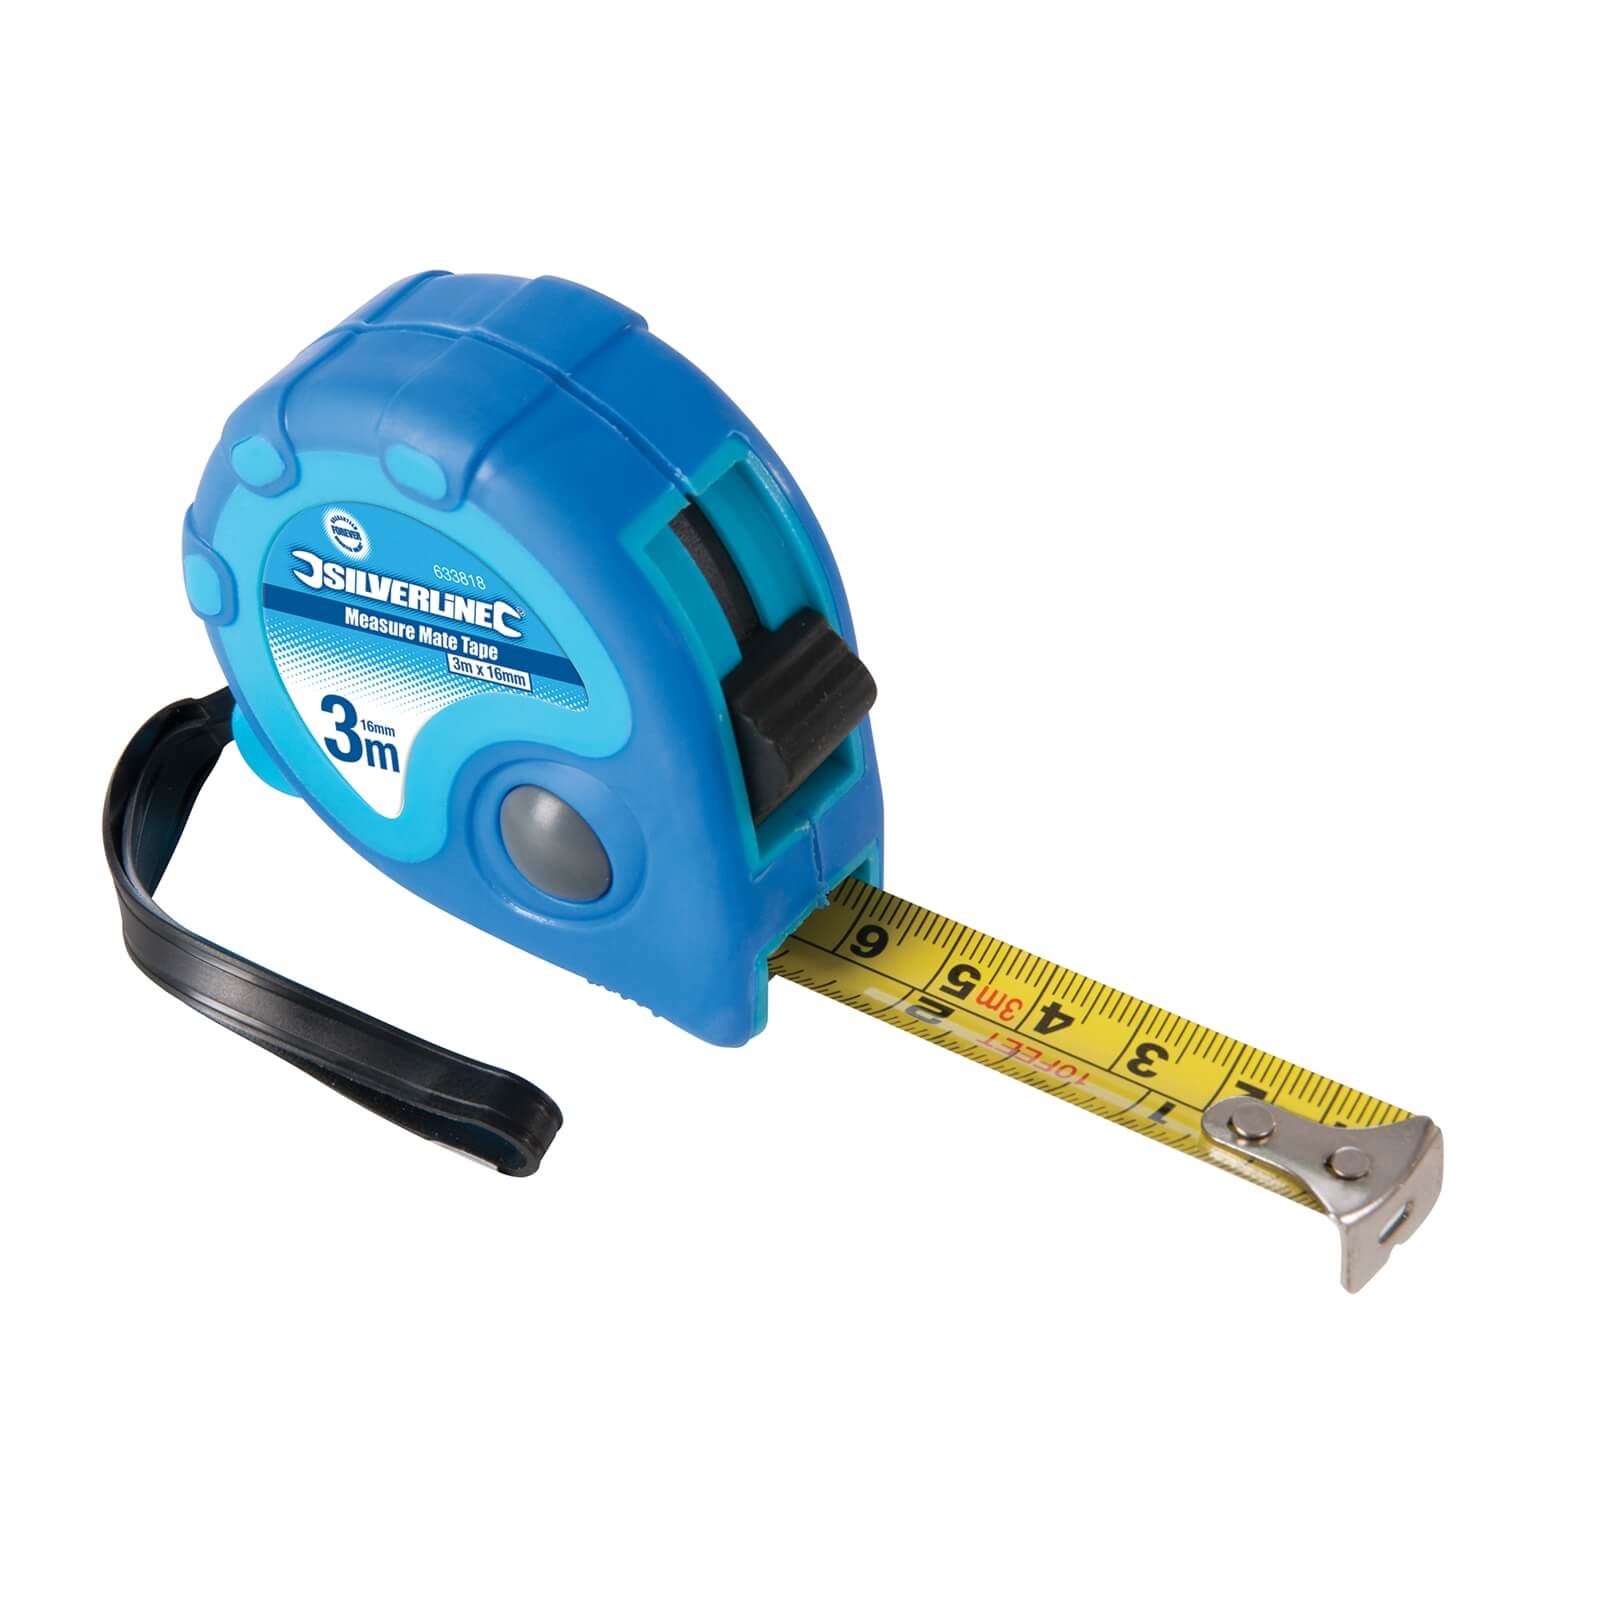 Photo of Silverline Measure Mate Tape 3m / 10ft X 16mm